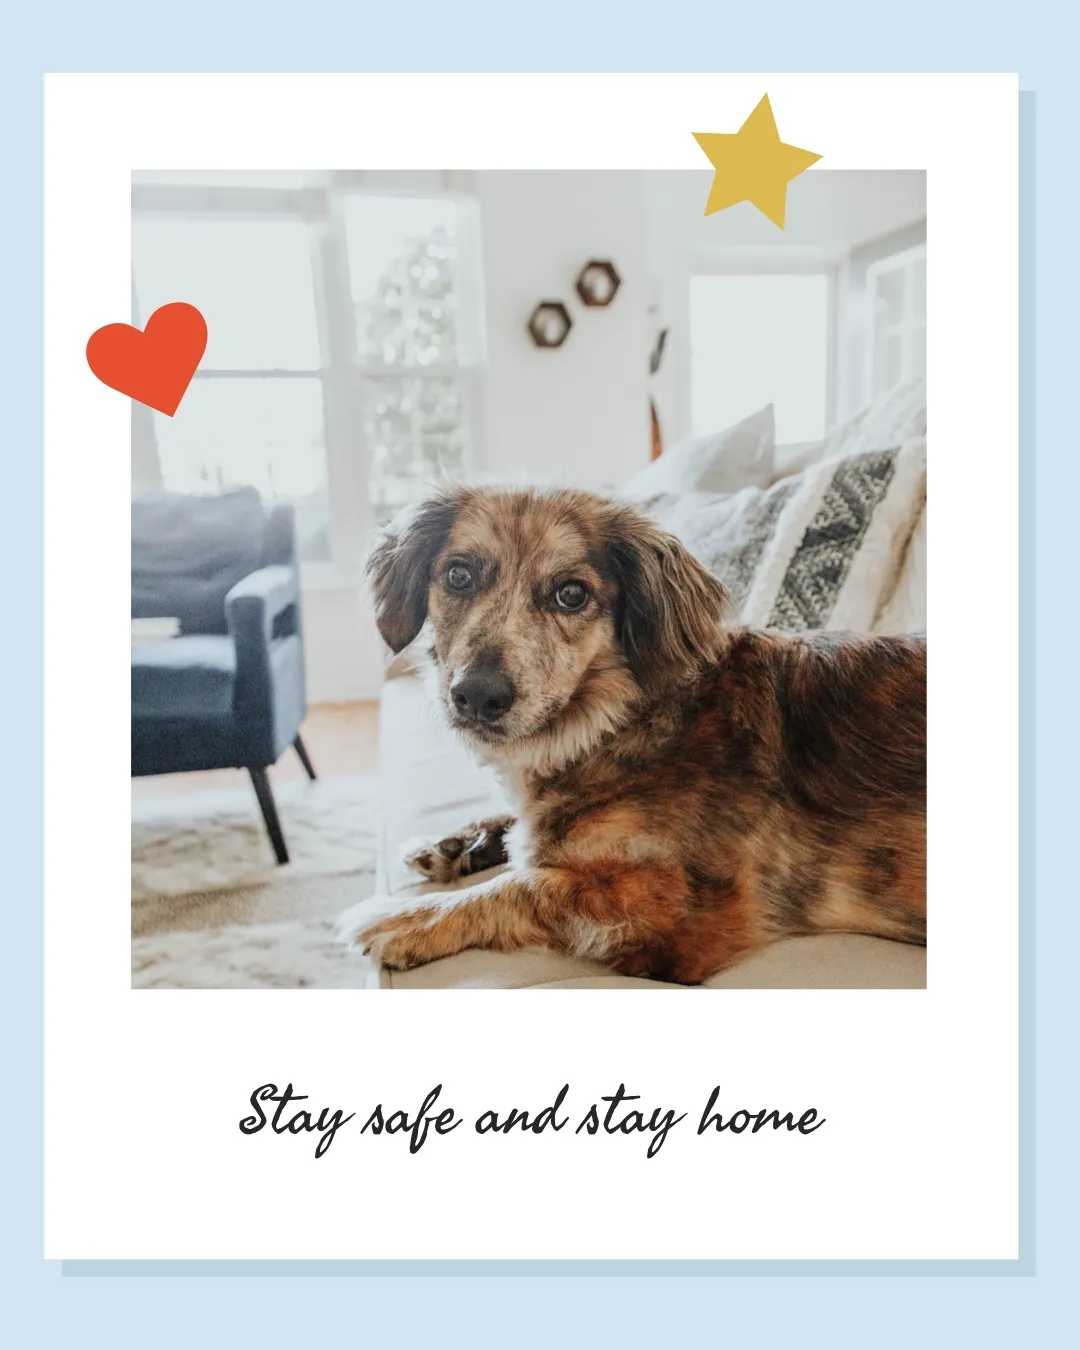 Dog Polaroid Photo and Stay Home Caption Instagram Portrait Graphic